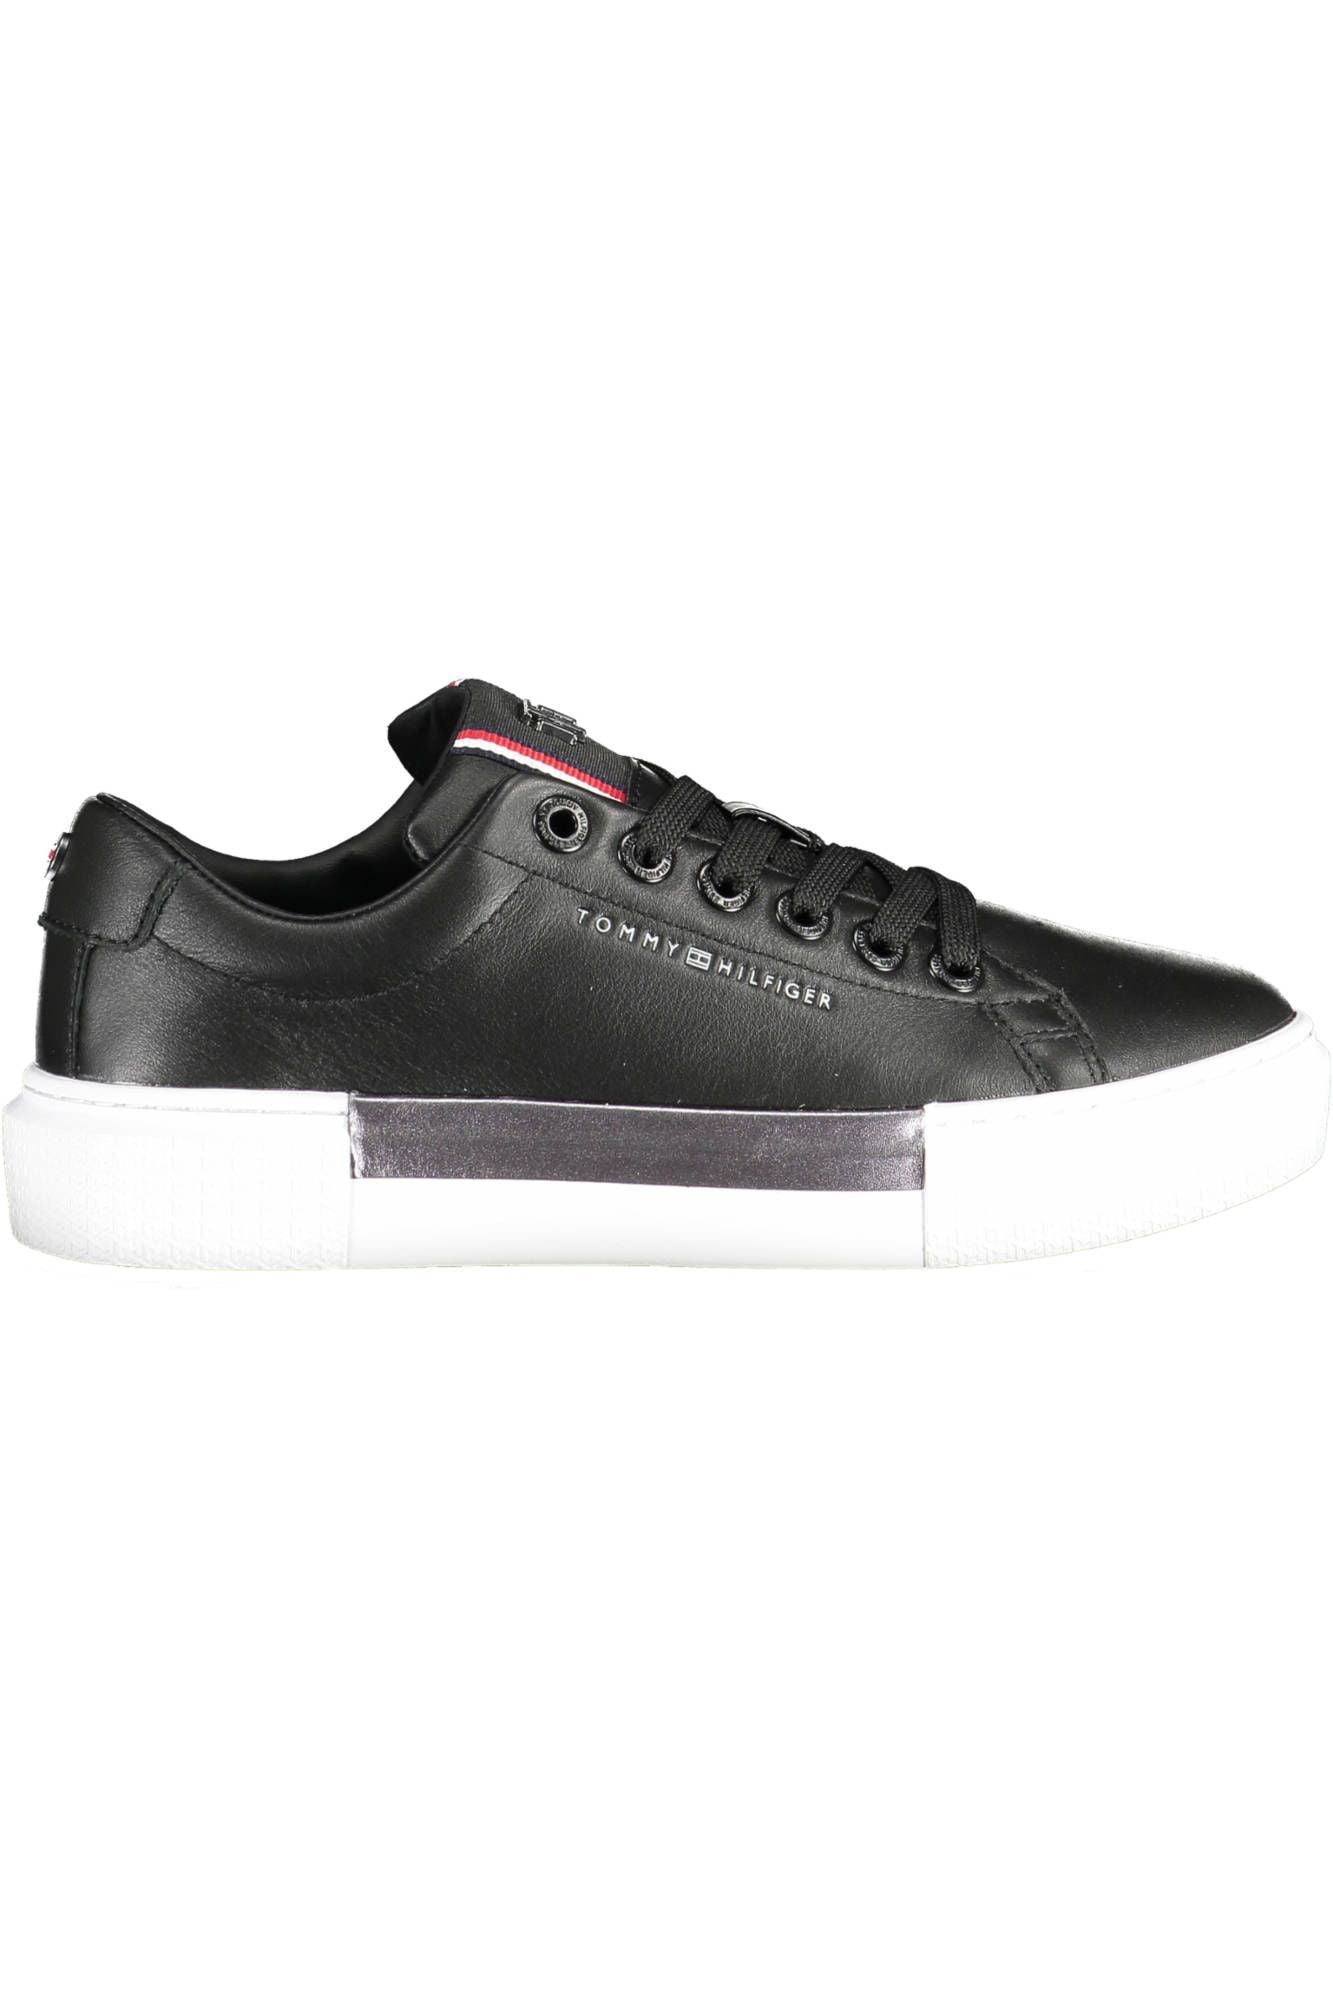 Chic Black Cotton-Leather Blend Sneakers